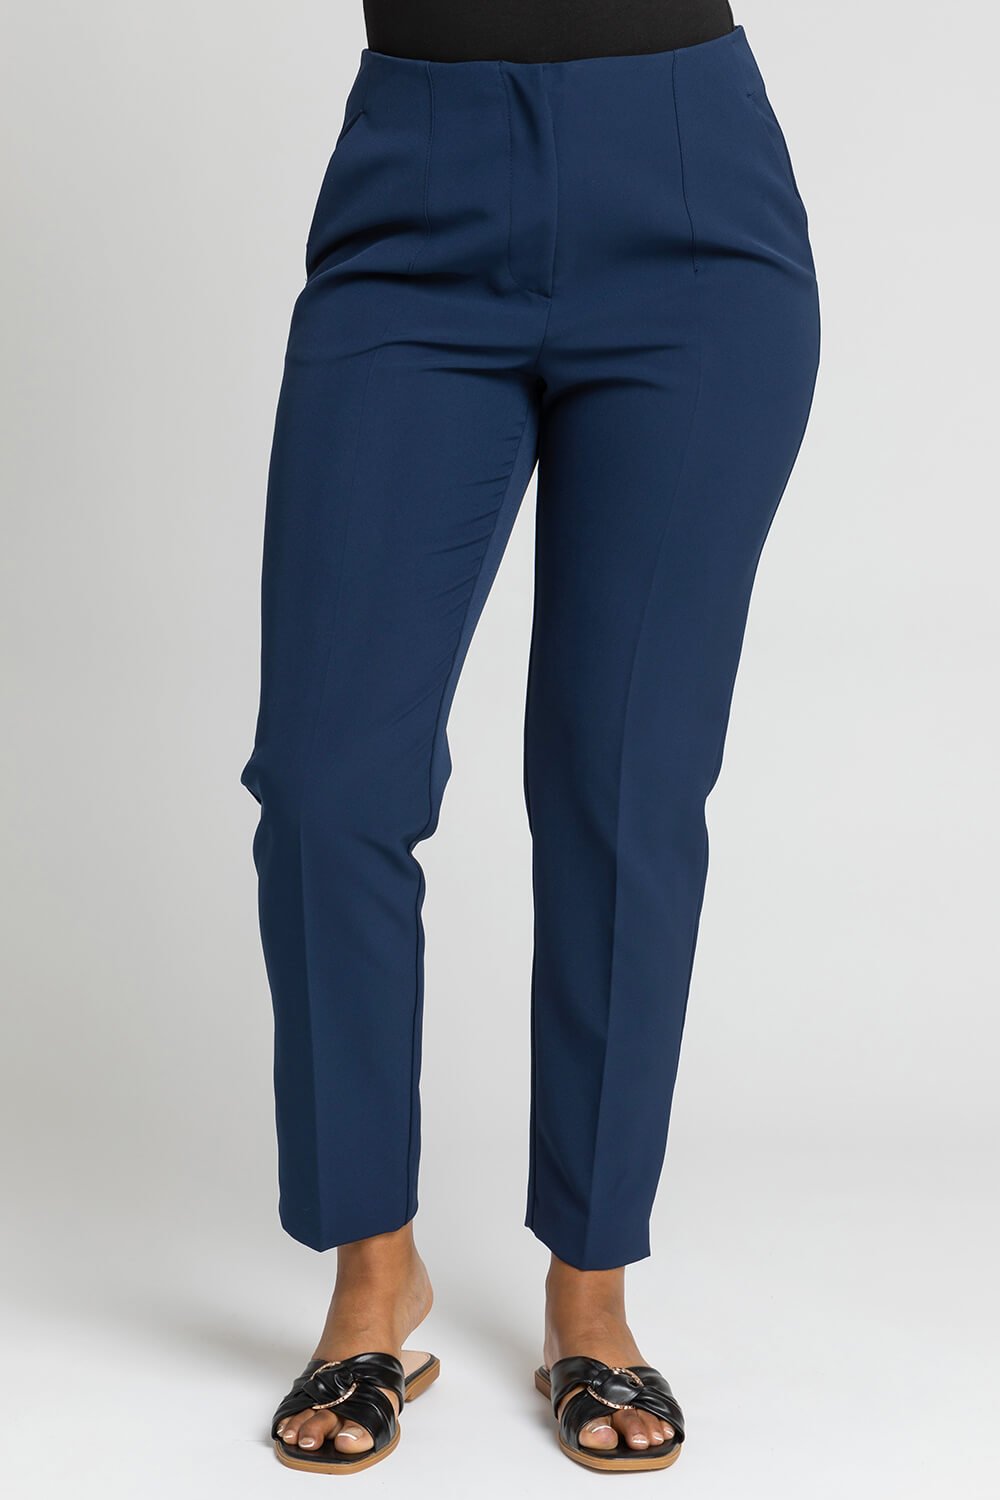 Petite Soft Jersey Tapered Trouser in Navy | Roman UK